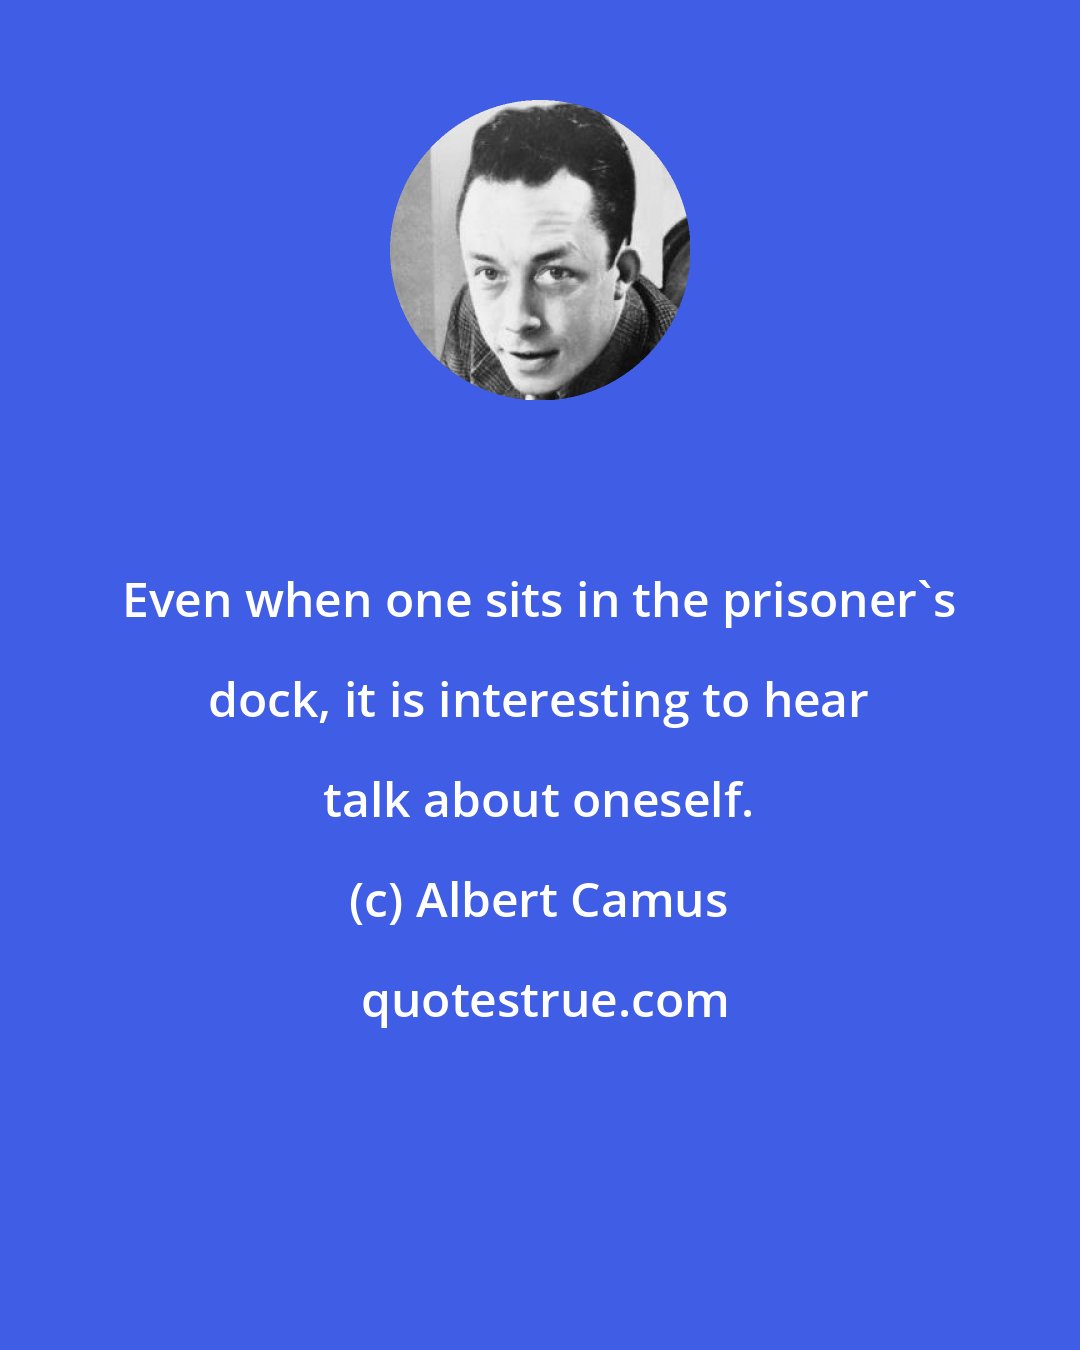 Albert Camus: Even when one sits in the prisoner's dock, it is interesting to hear talk about oneself.